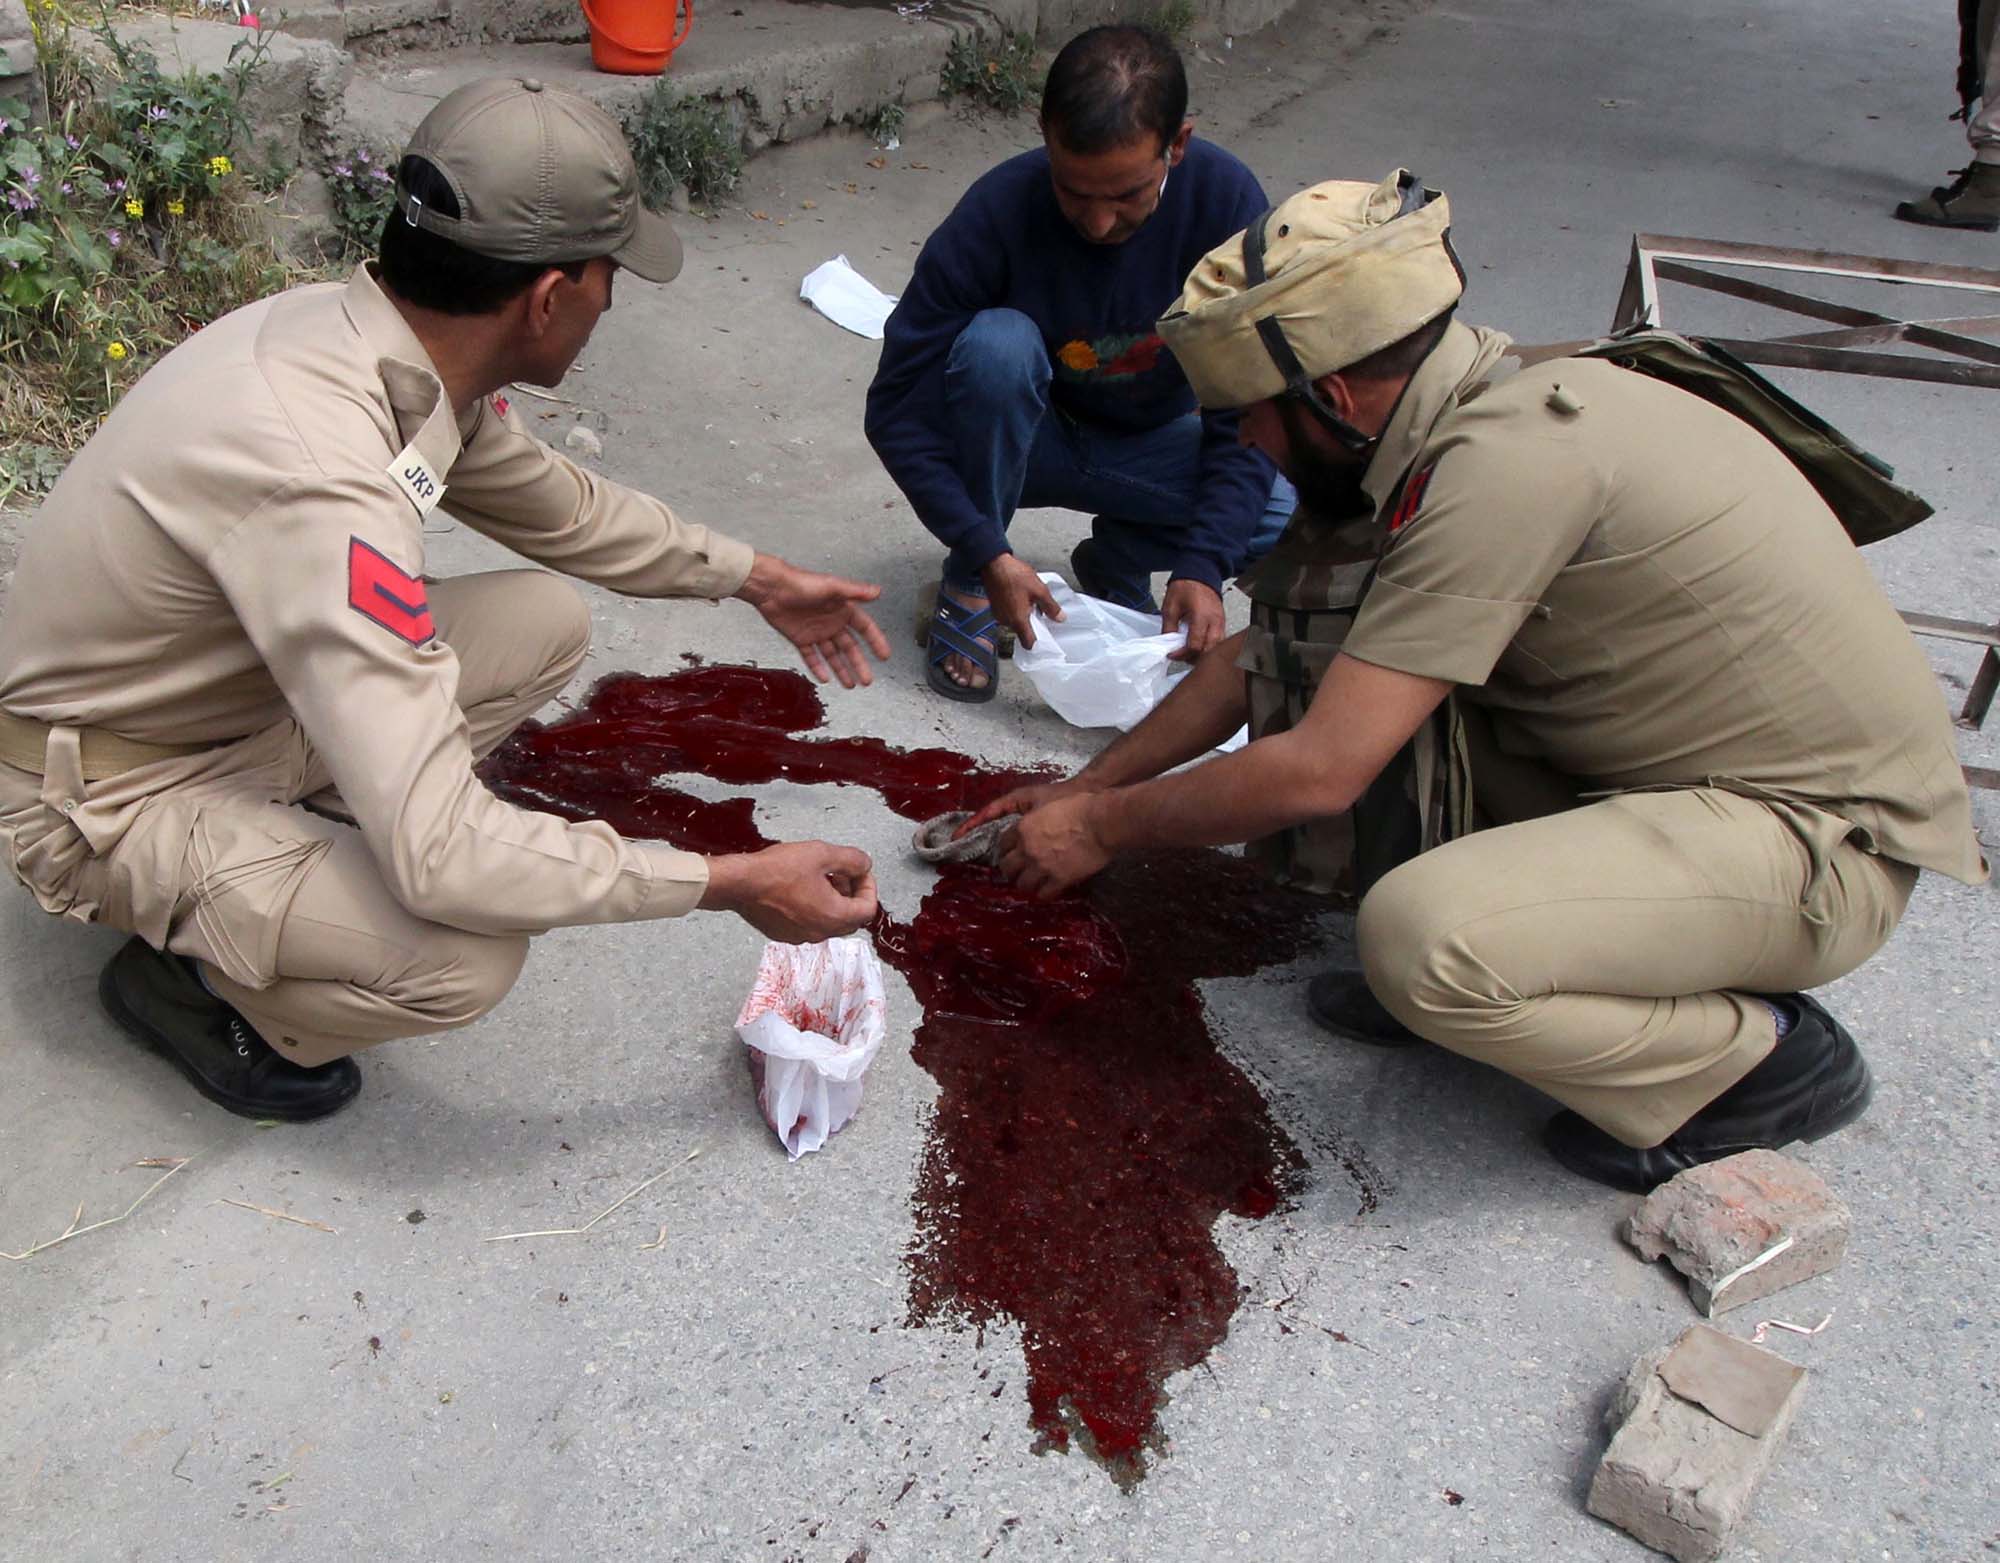 policemen wash the blood of their colleagues in Zadibal area of Srinagar on May 23, 2016. Two policemen were shot dead by suspected militants early morning in Srinagar. PHOTO BY BILAL BAHADUR